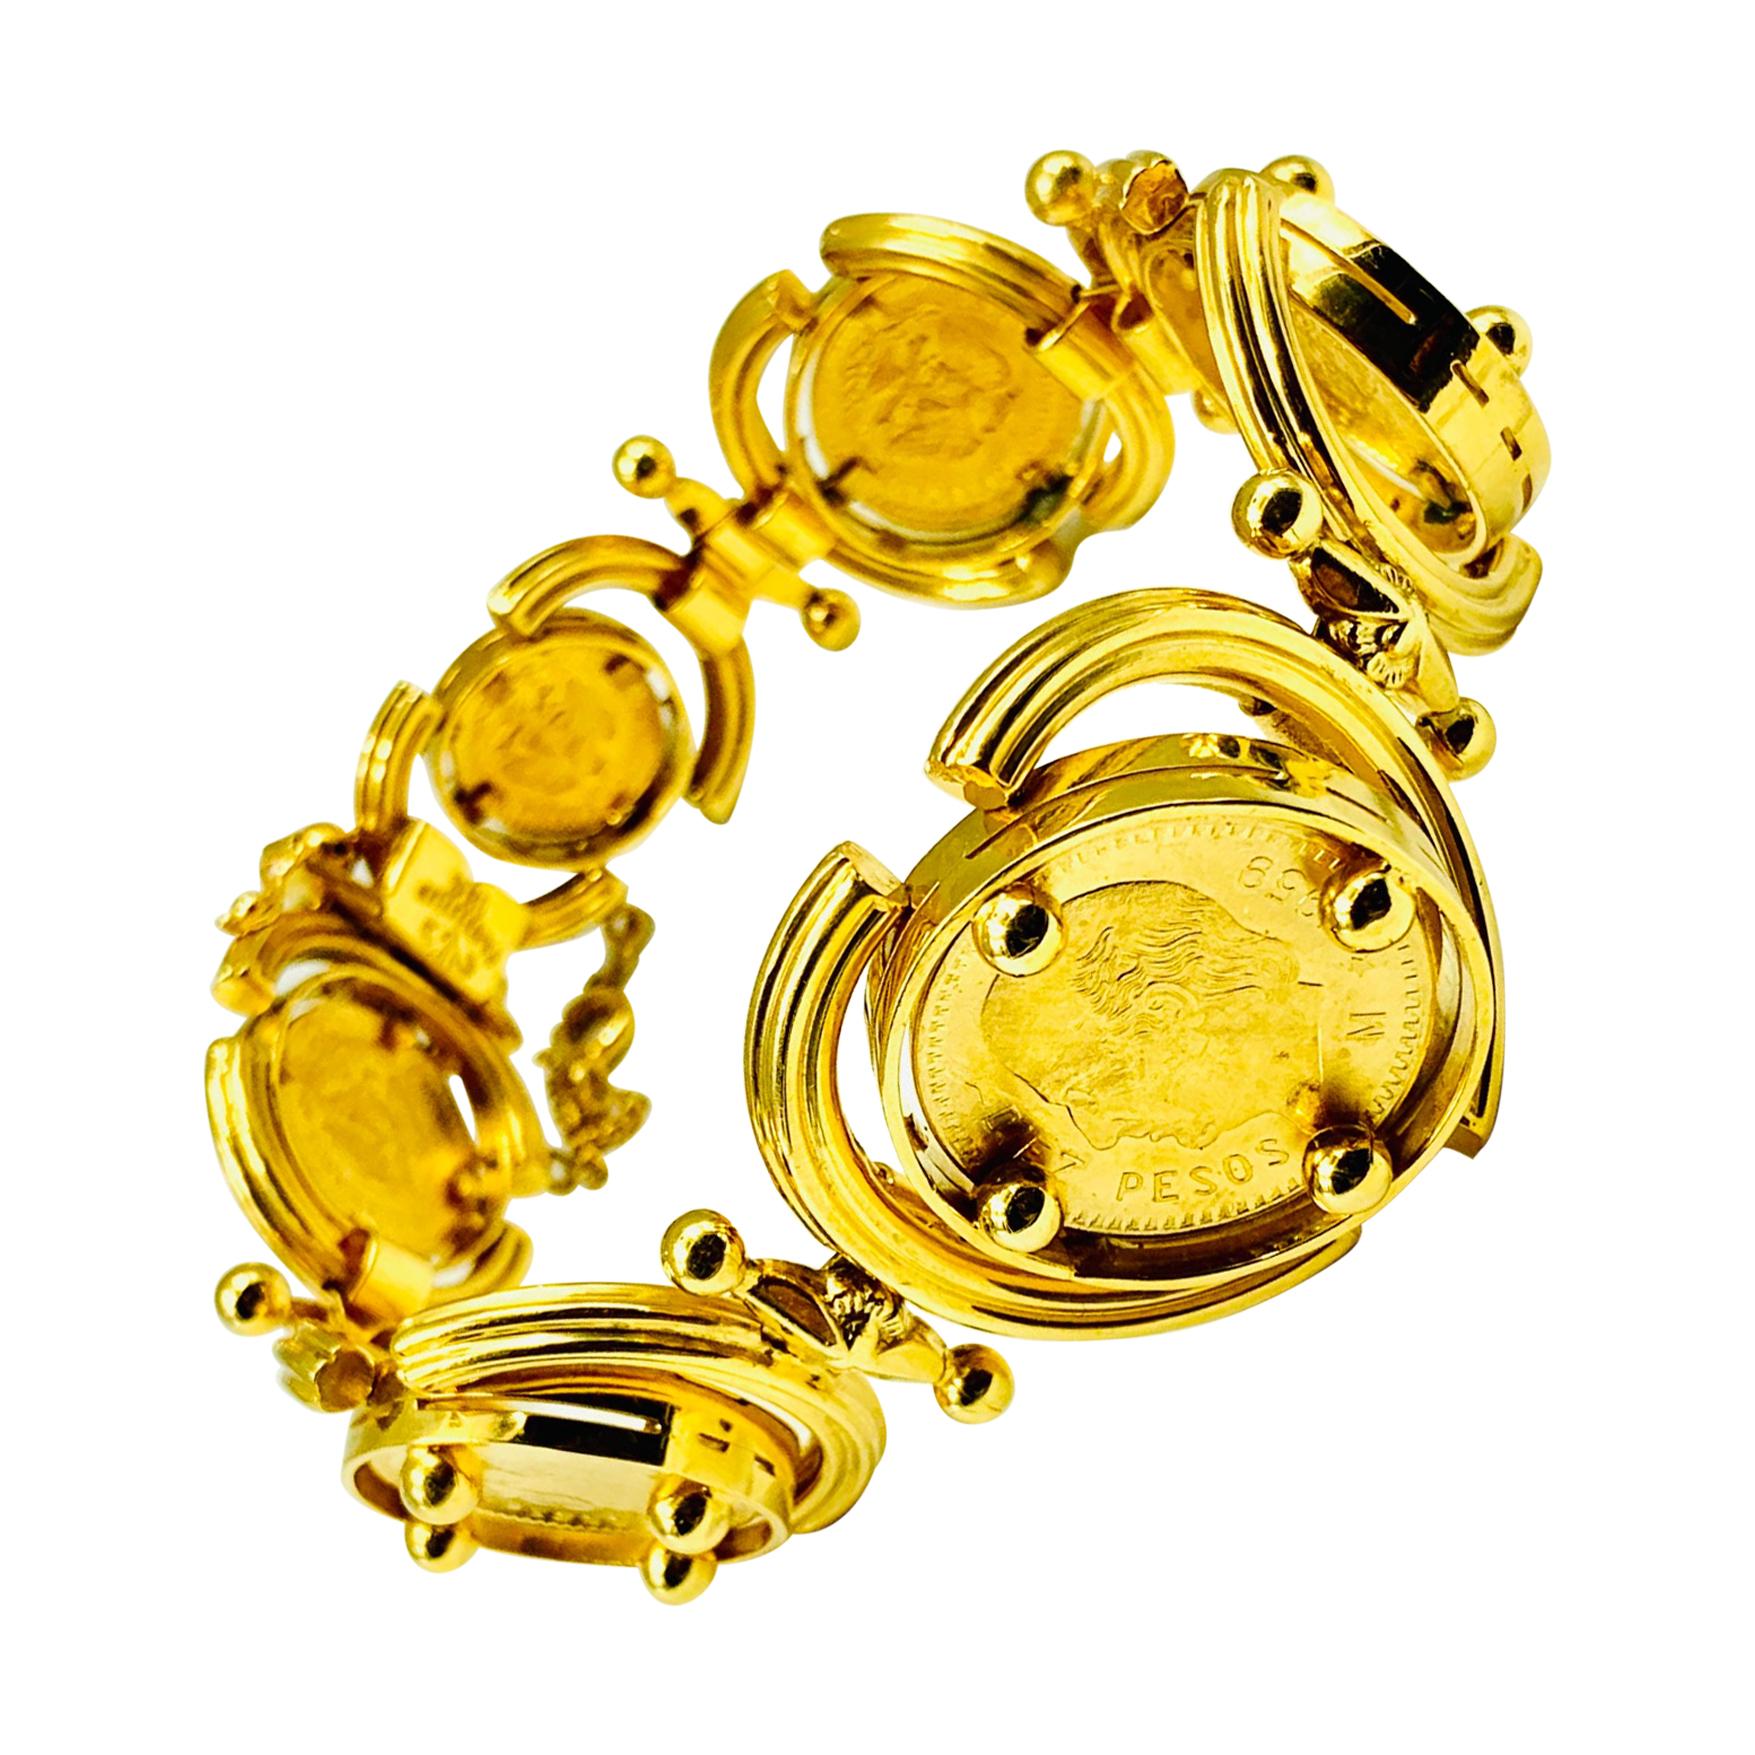 Fabulous large high carat gold coin bracelet composed of six graduated 24K gold coins set in an unusual articulated 18K gold setting. This interesting design allows for eye-catching movement of the coins as they grace one's wrist. Six solid gold